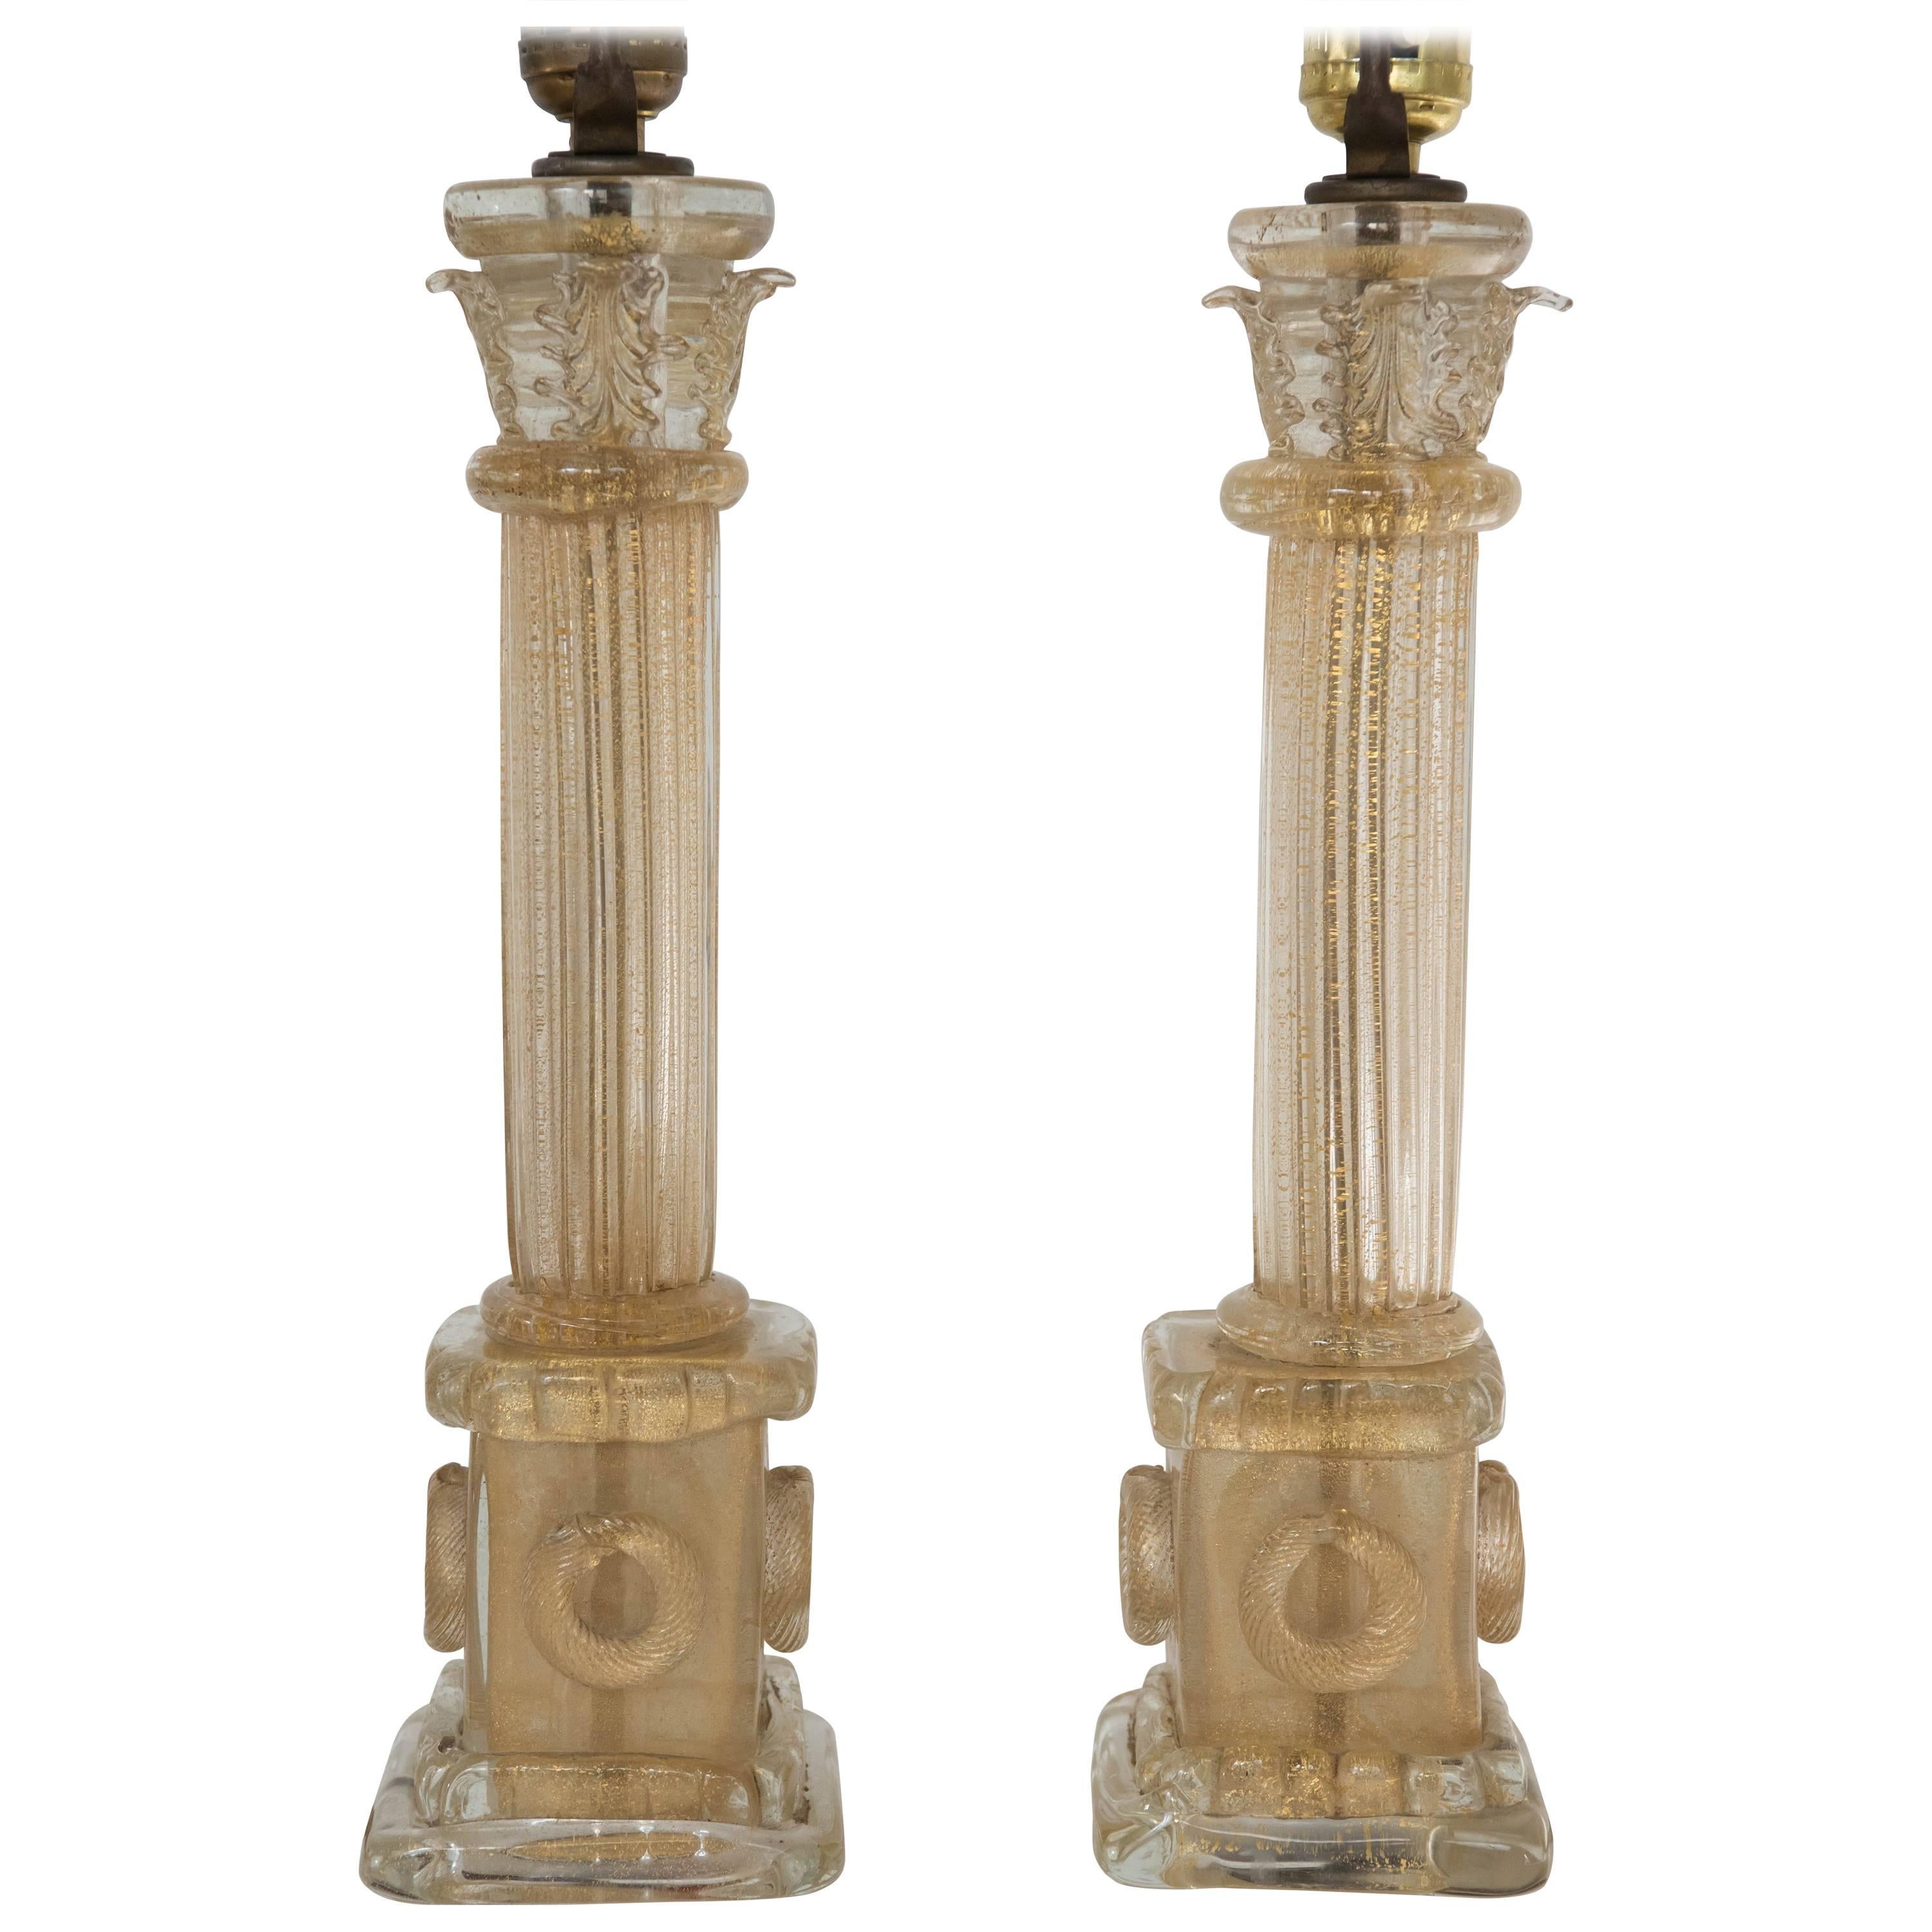 Ercole Barovier Pair of Corinthian Column Lamp Bases For Sale